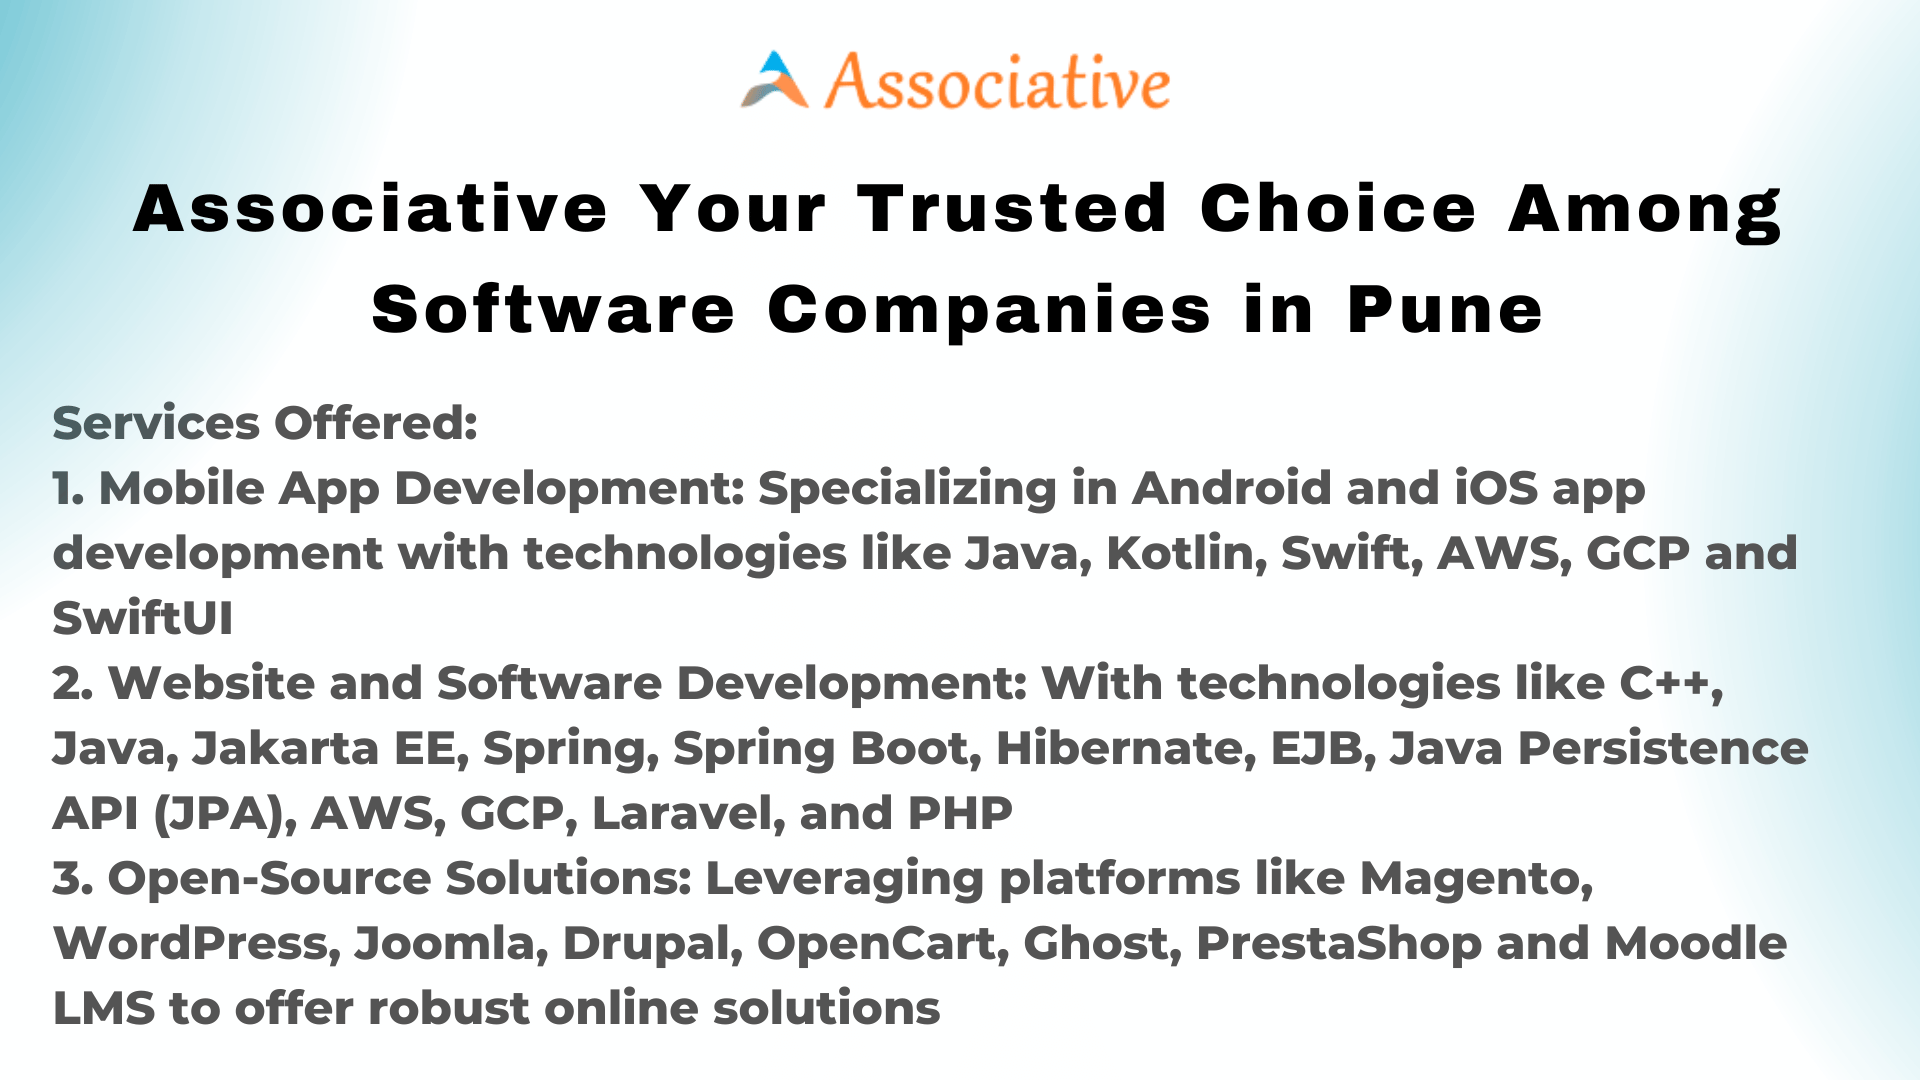 Associative Your Trusted Choice Among Software Companies in Pune